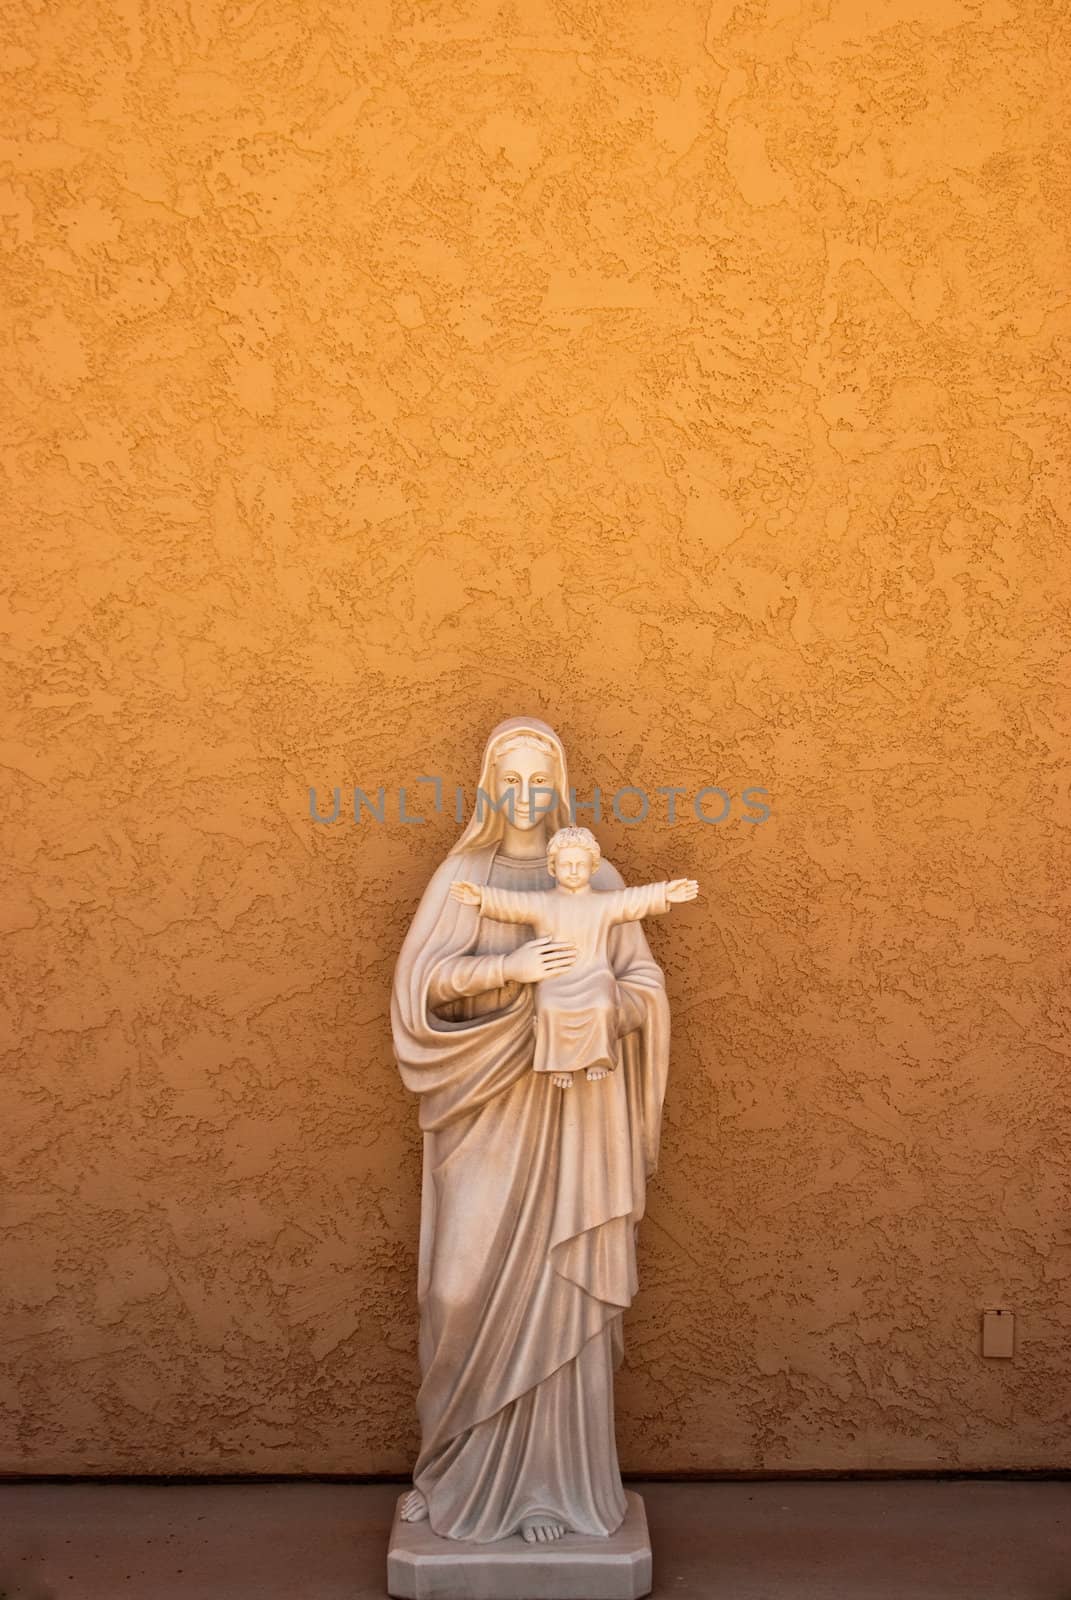 Statue of mother and child on orange adobe wall